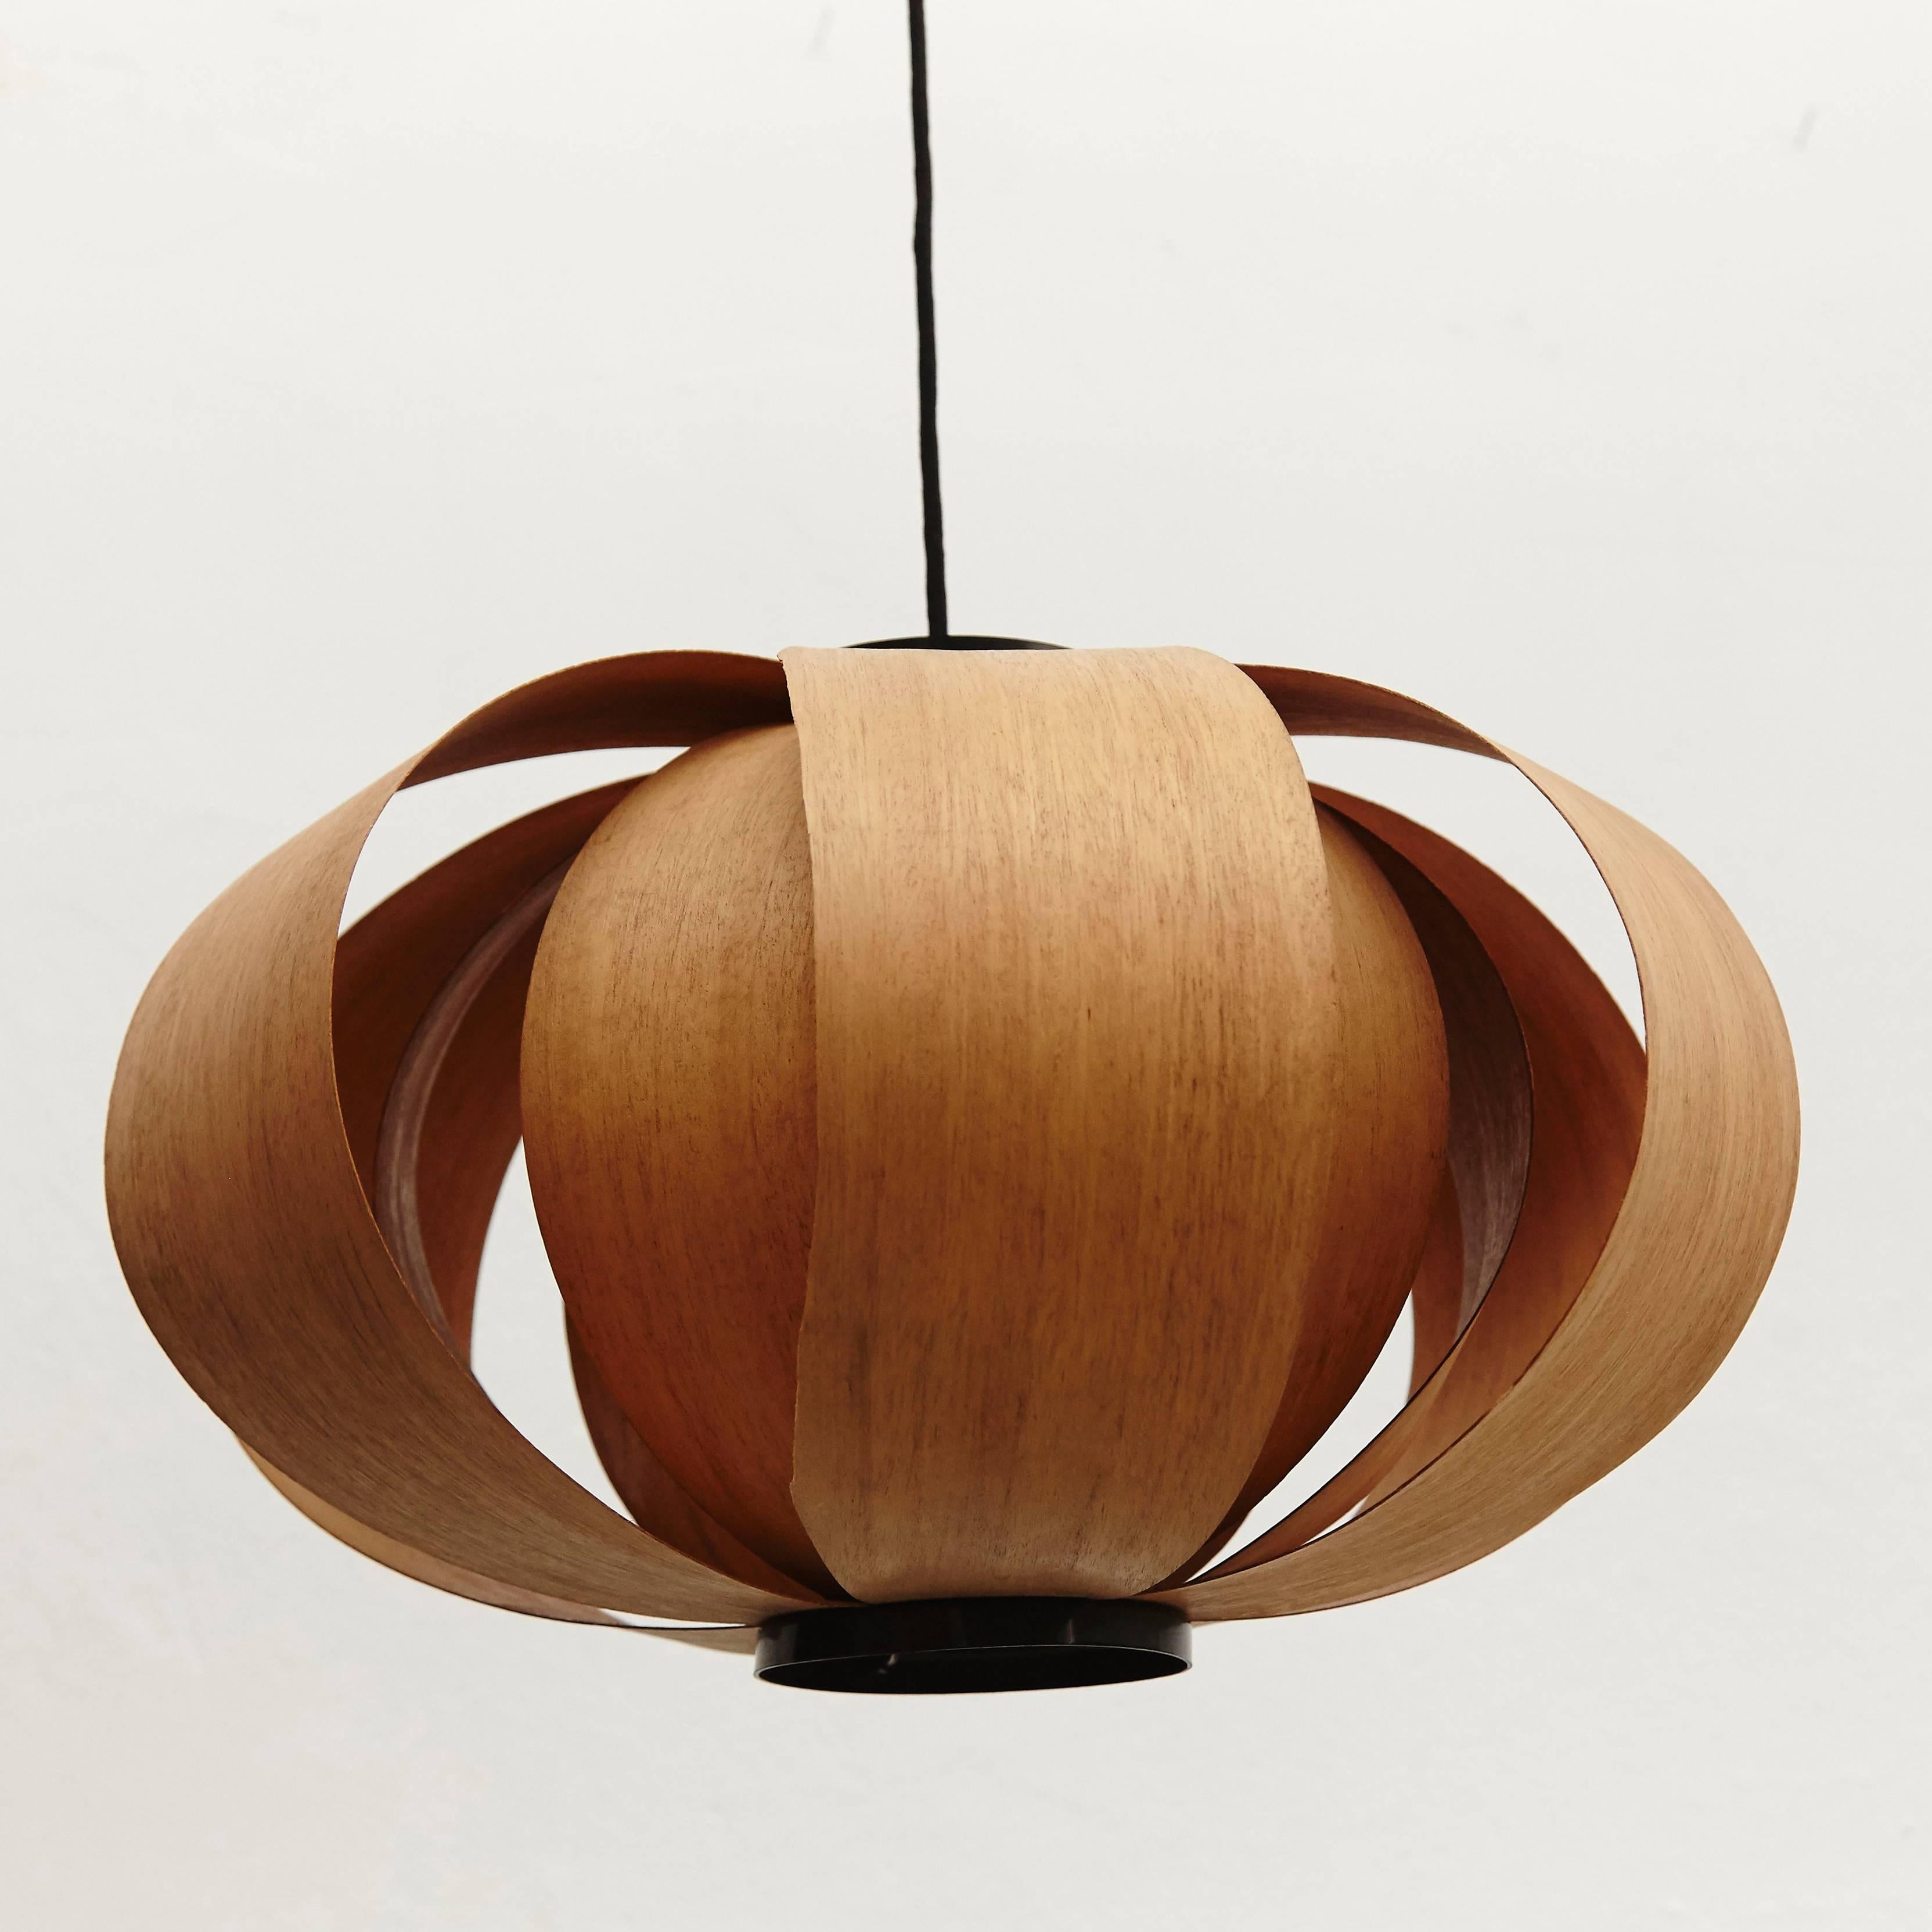 Disa lamp or coderch lamp, designed by Jose Antonio Coderch in 1957, manufactured in Spain, circa 1950.
It's composed by two sheets of betwood in two diferent layers size. 
Aluminium structure and bentwood as lampshade.

The intention is to